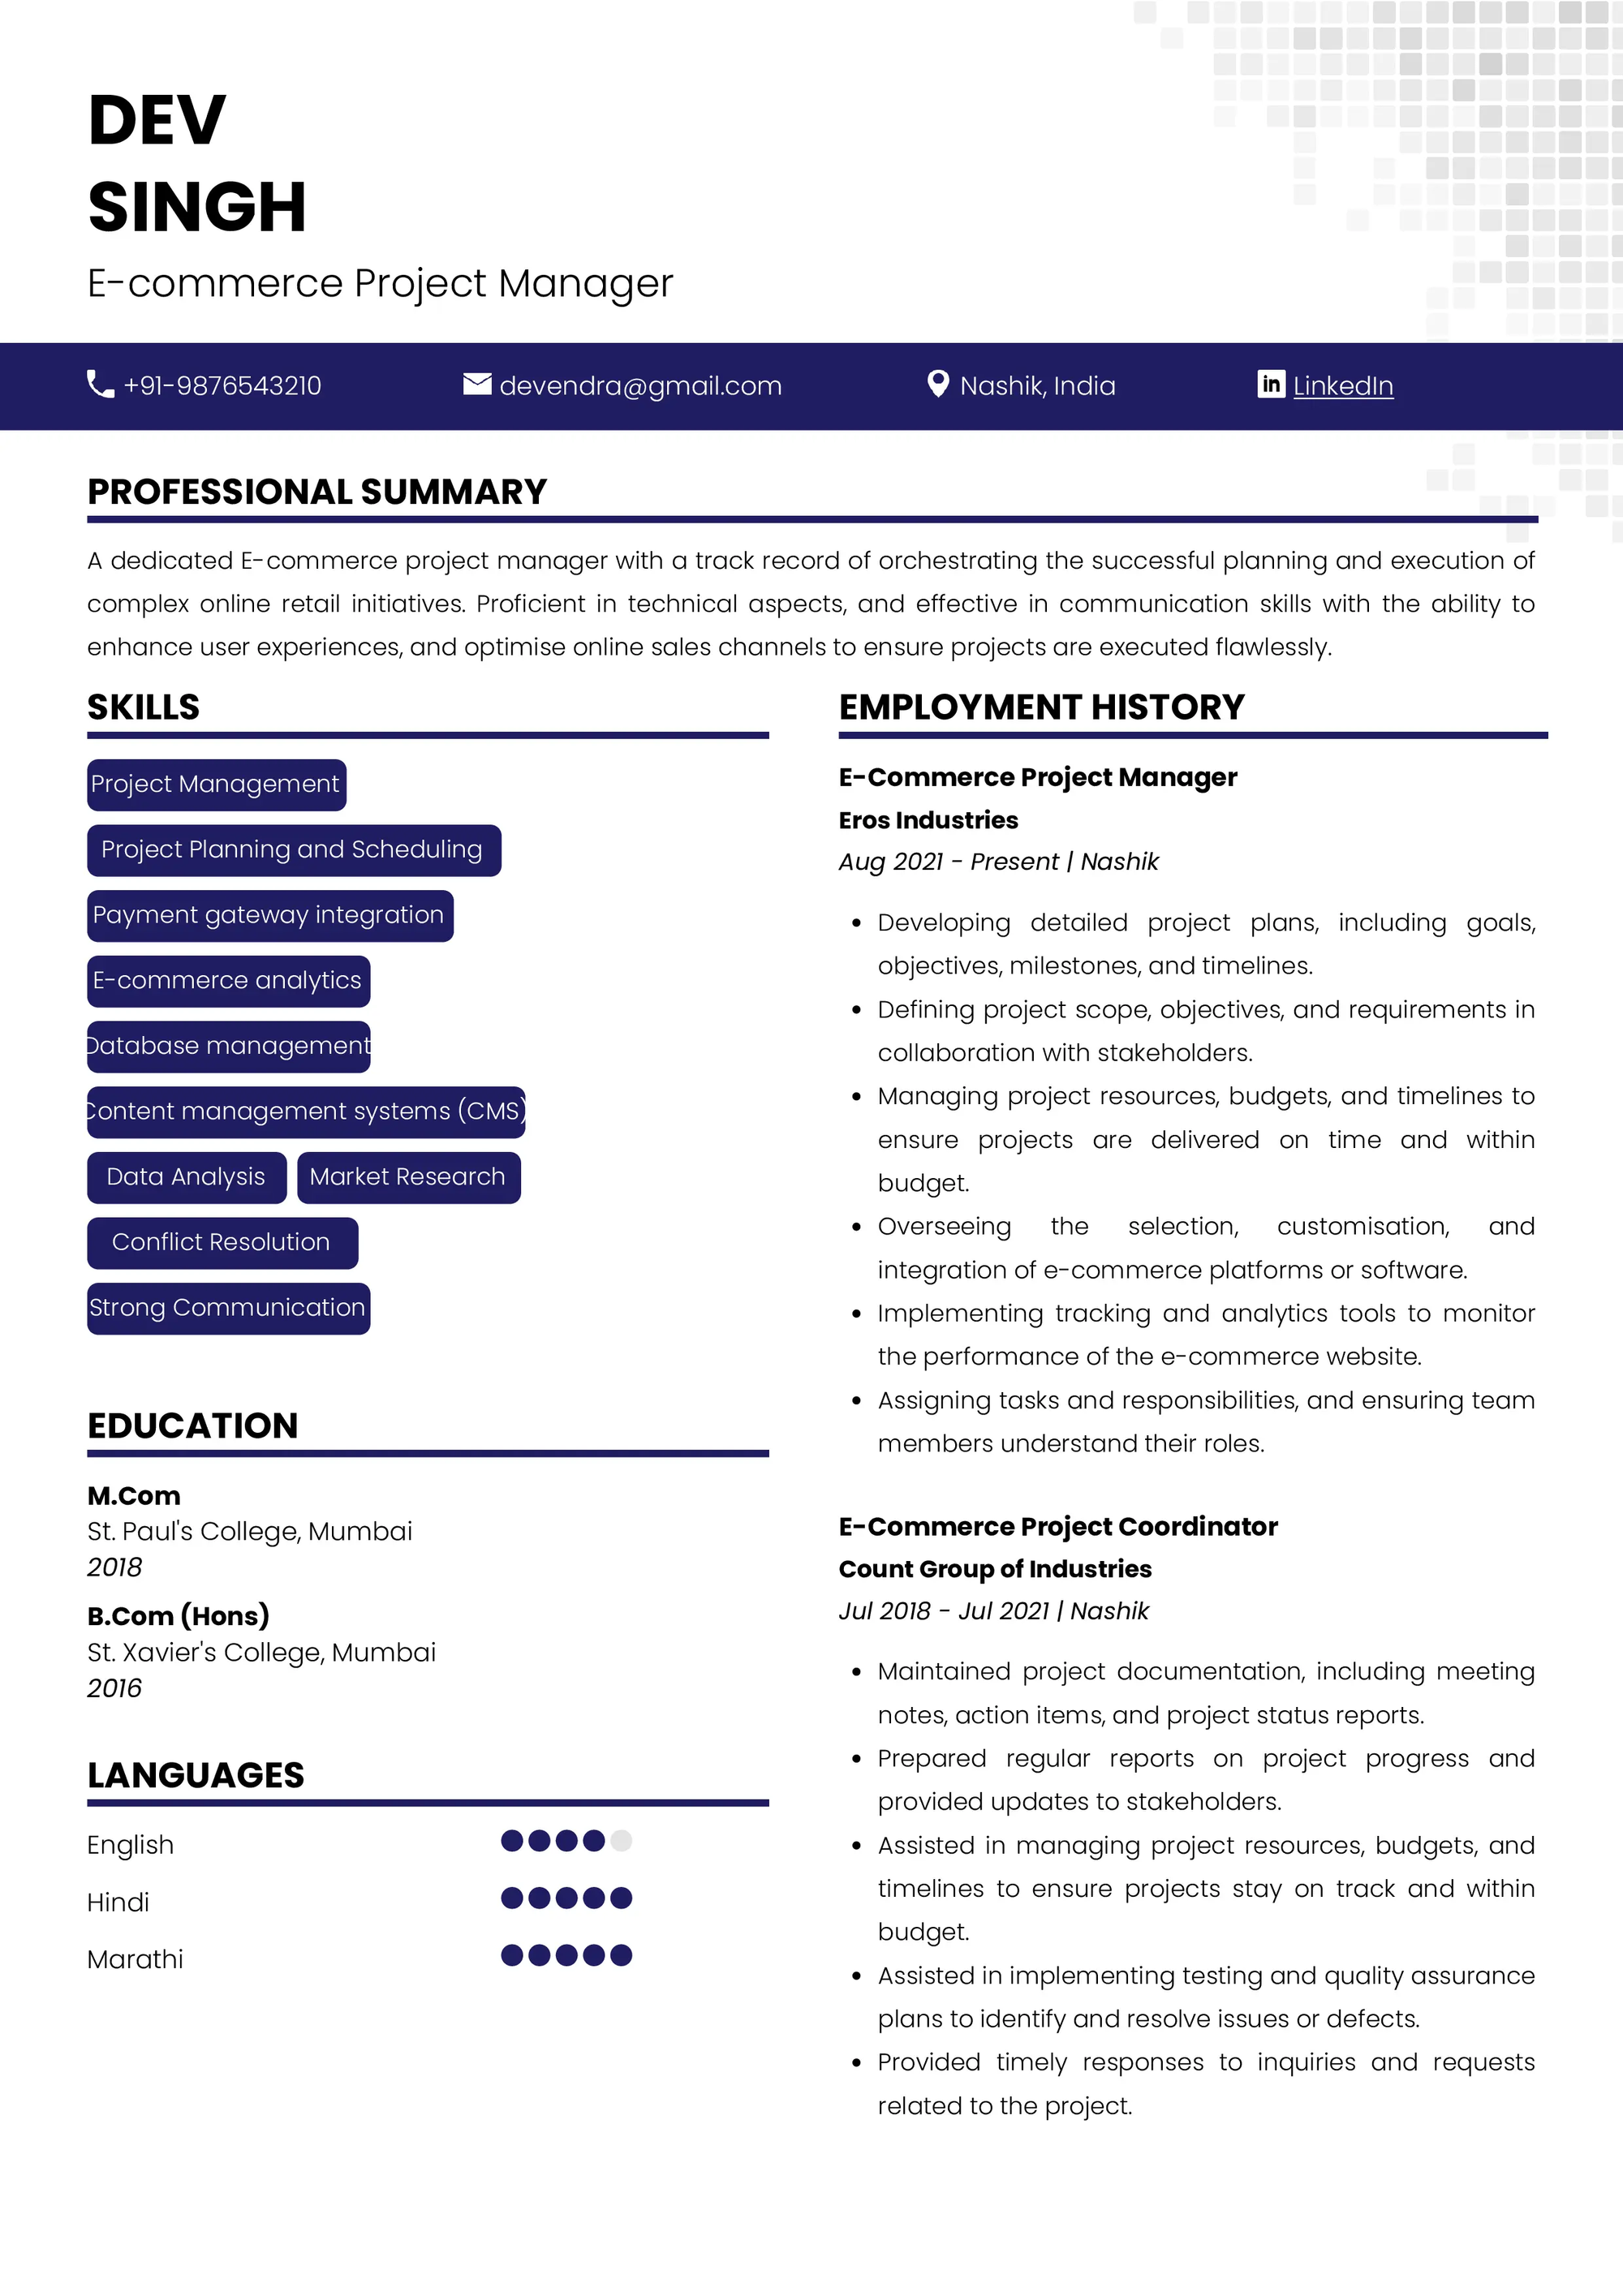 Resume of e-Commerce Project Manager built on Resumod